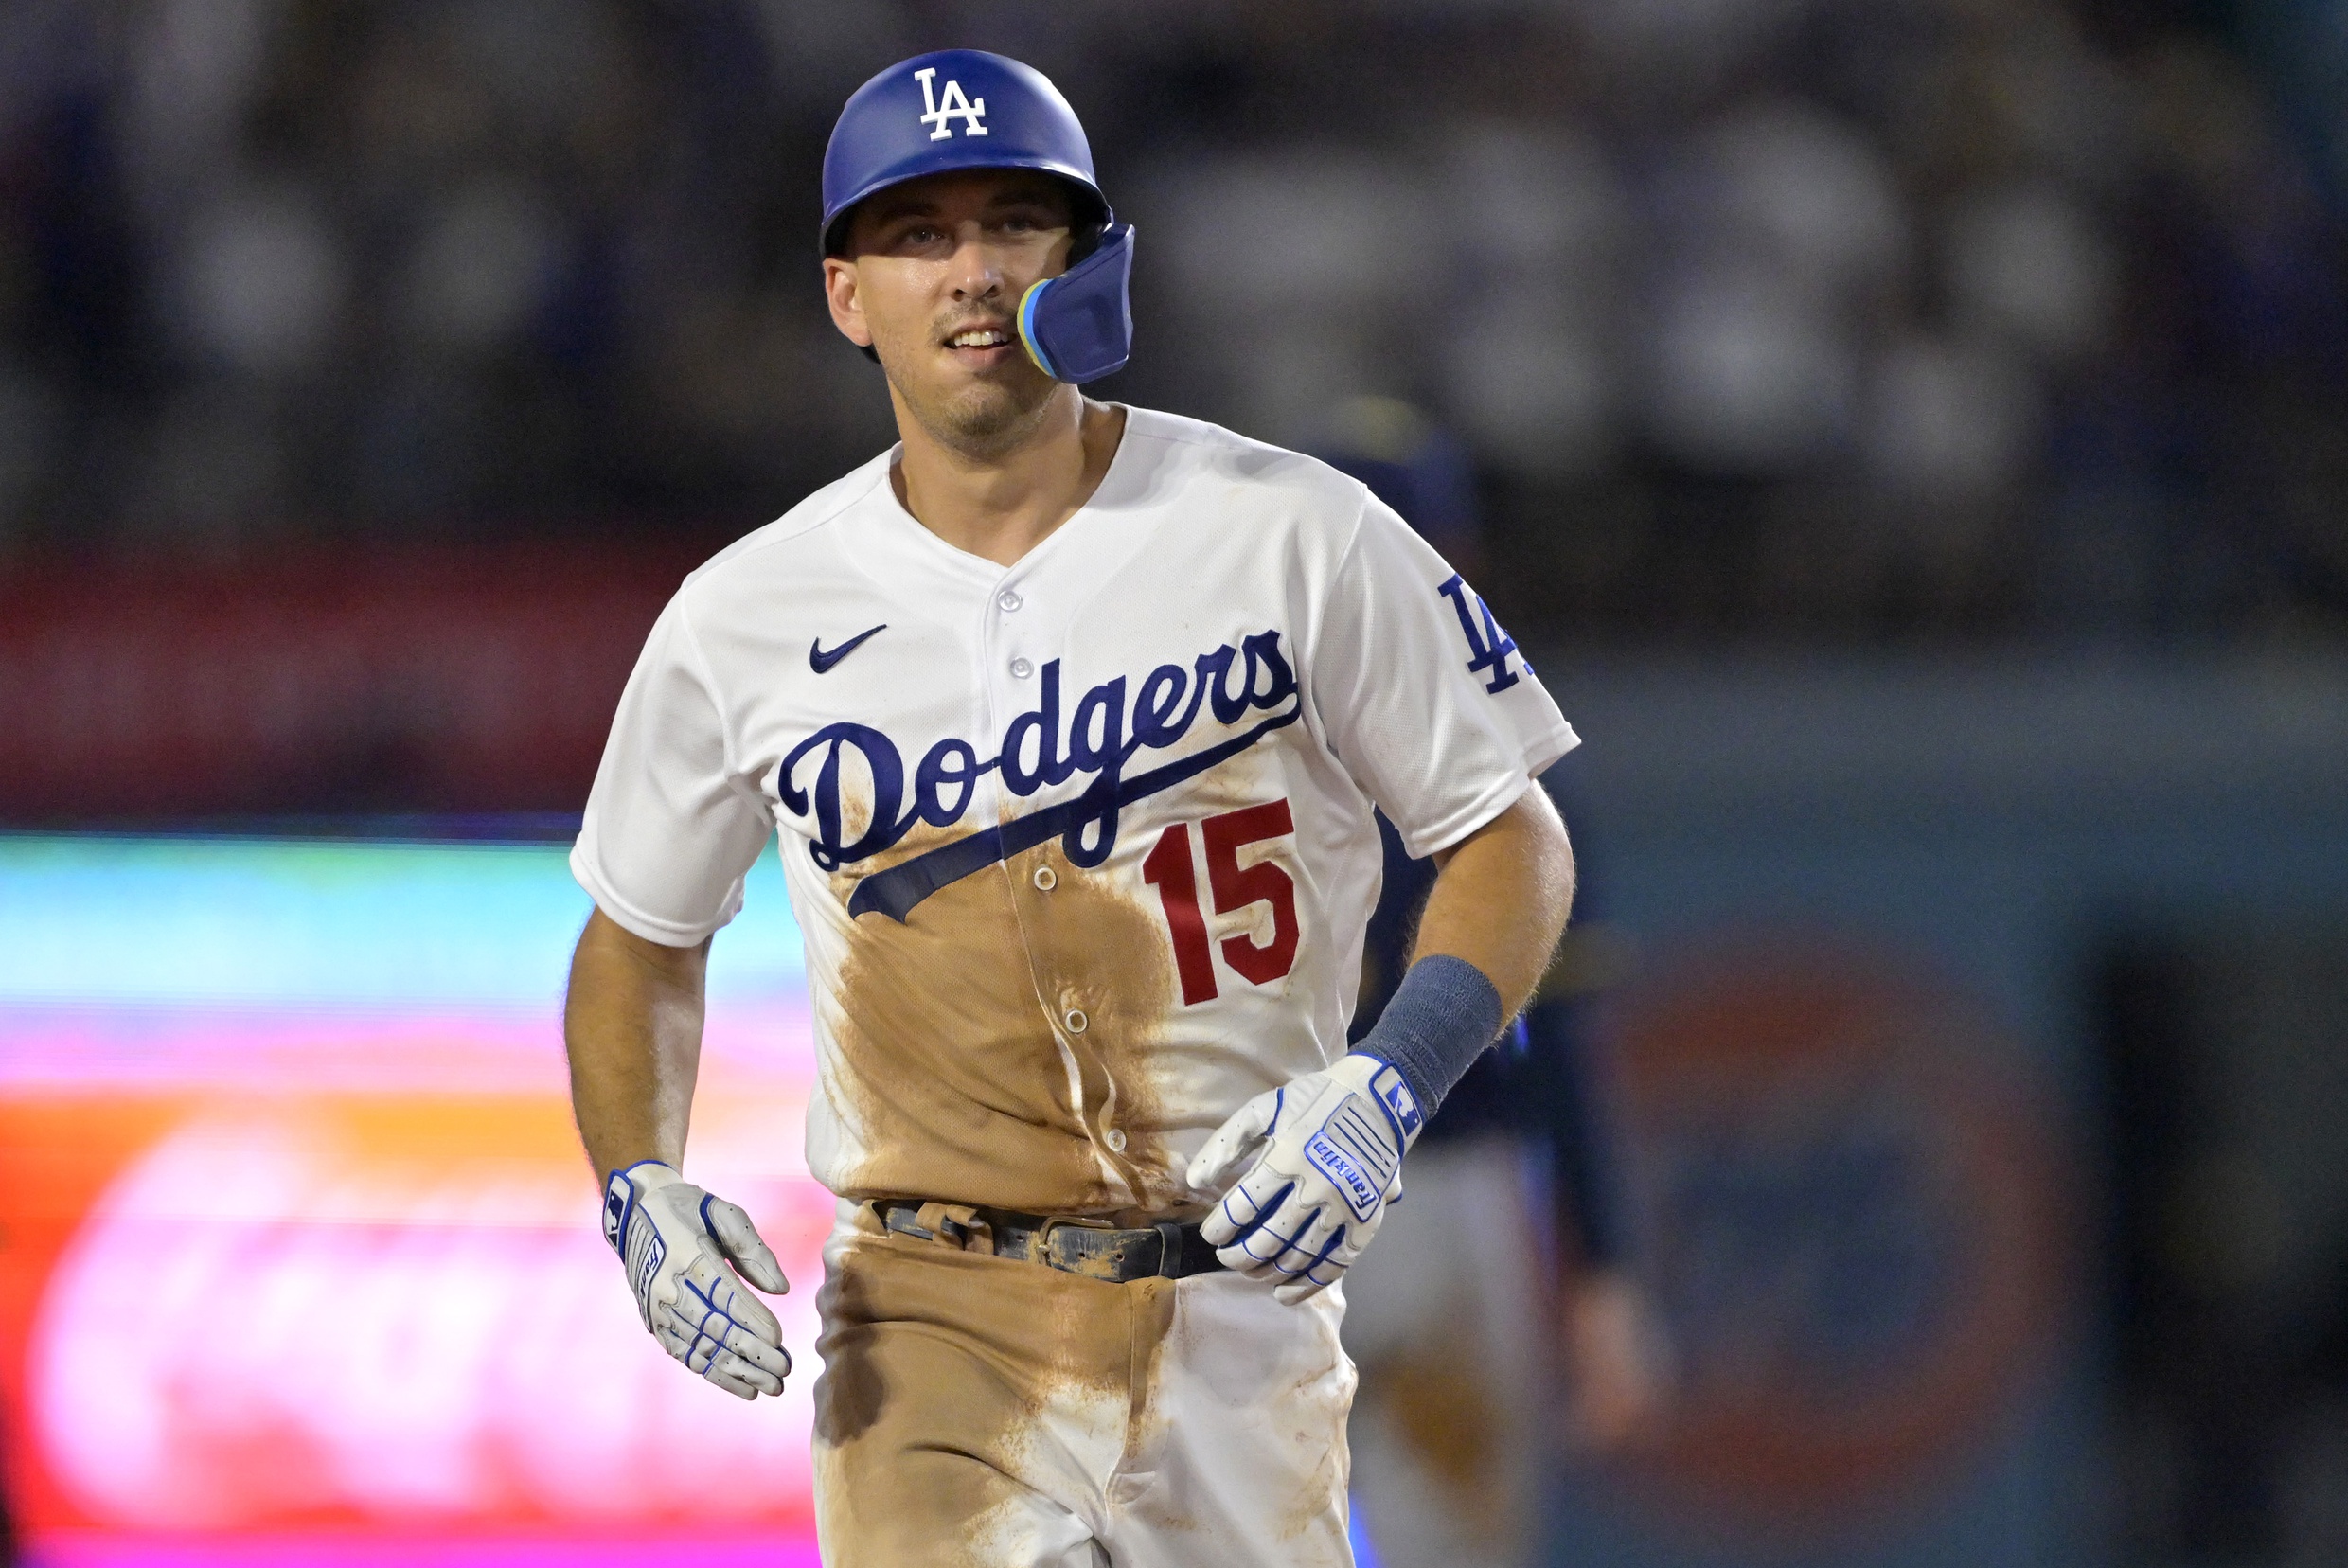 Dodgers News: Austin Barnes Forced to Exit Tuesday’s Game Early After Vicious Blow to Head